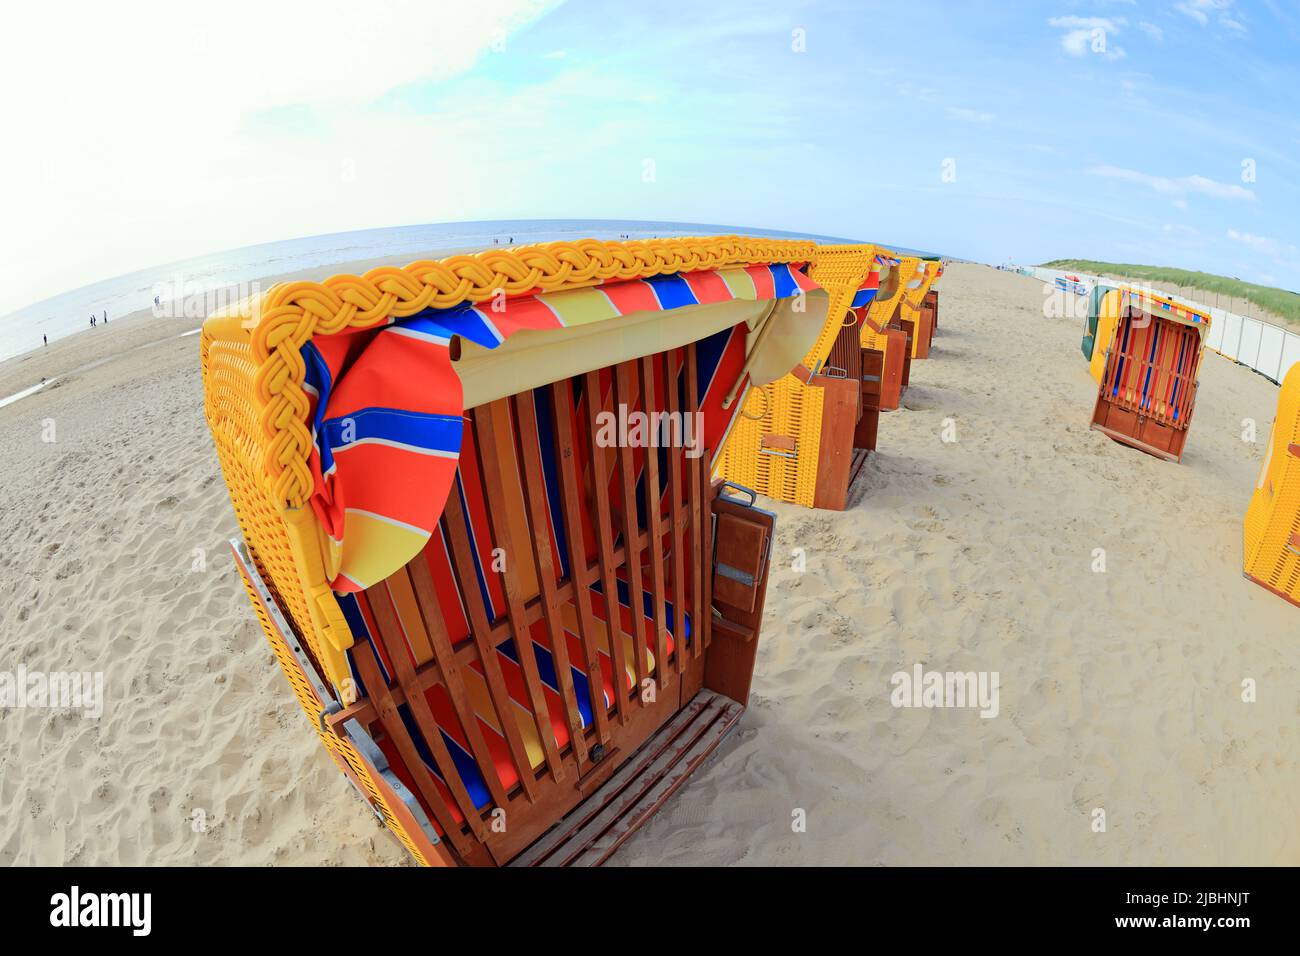 Roofed wicker beach chairs. Egmond aan Zee, North Sea, the Netherlands. Stock Photo